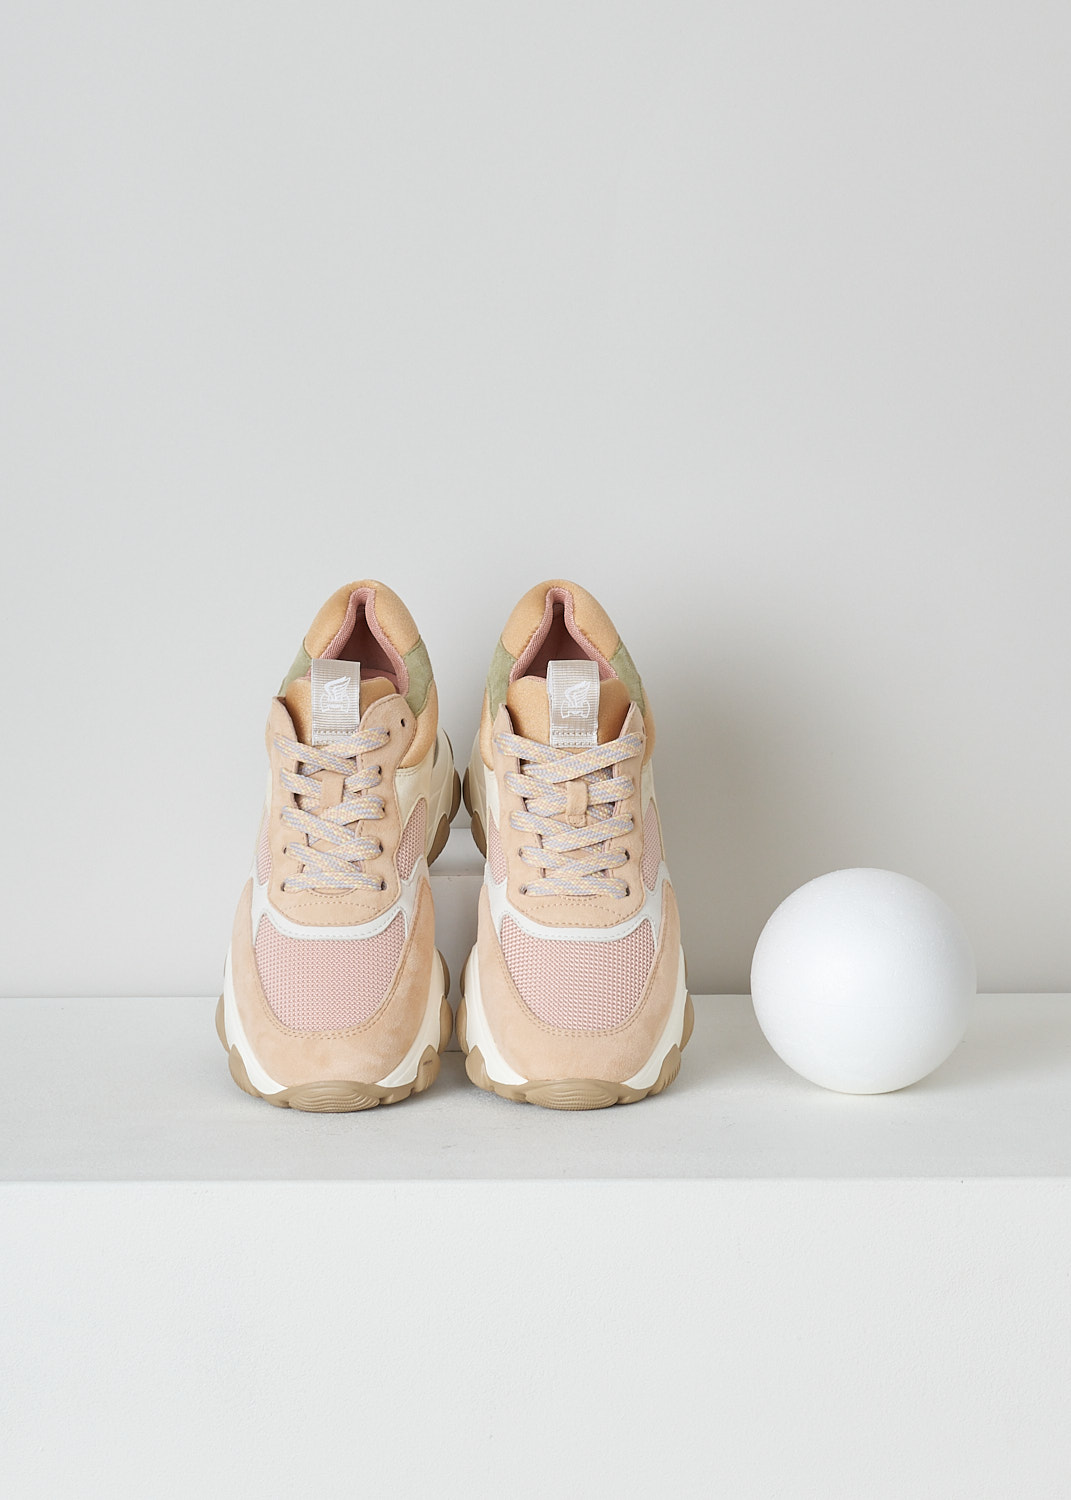 HOGAN, HYPERACTIVE ALLACCIATO MULTICOLORED SNEAKERS, HXW5400DG60QZ80MR4_QZ8,  Pink, Beige, Orange, Top,  These chunky sneakers feature front lace-up fastening with multicolored laces. The sneakers have a paneled look, alternating leather and fabric patches in pastel tones. These sneakers have a chunky sole. The sneakers have a removable memory foam insole and comes with an additional pair of dusty pink laces.   
